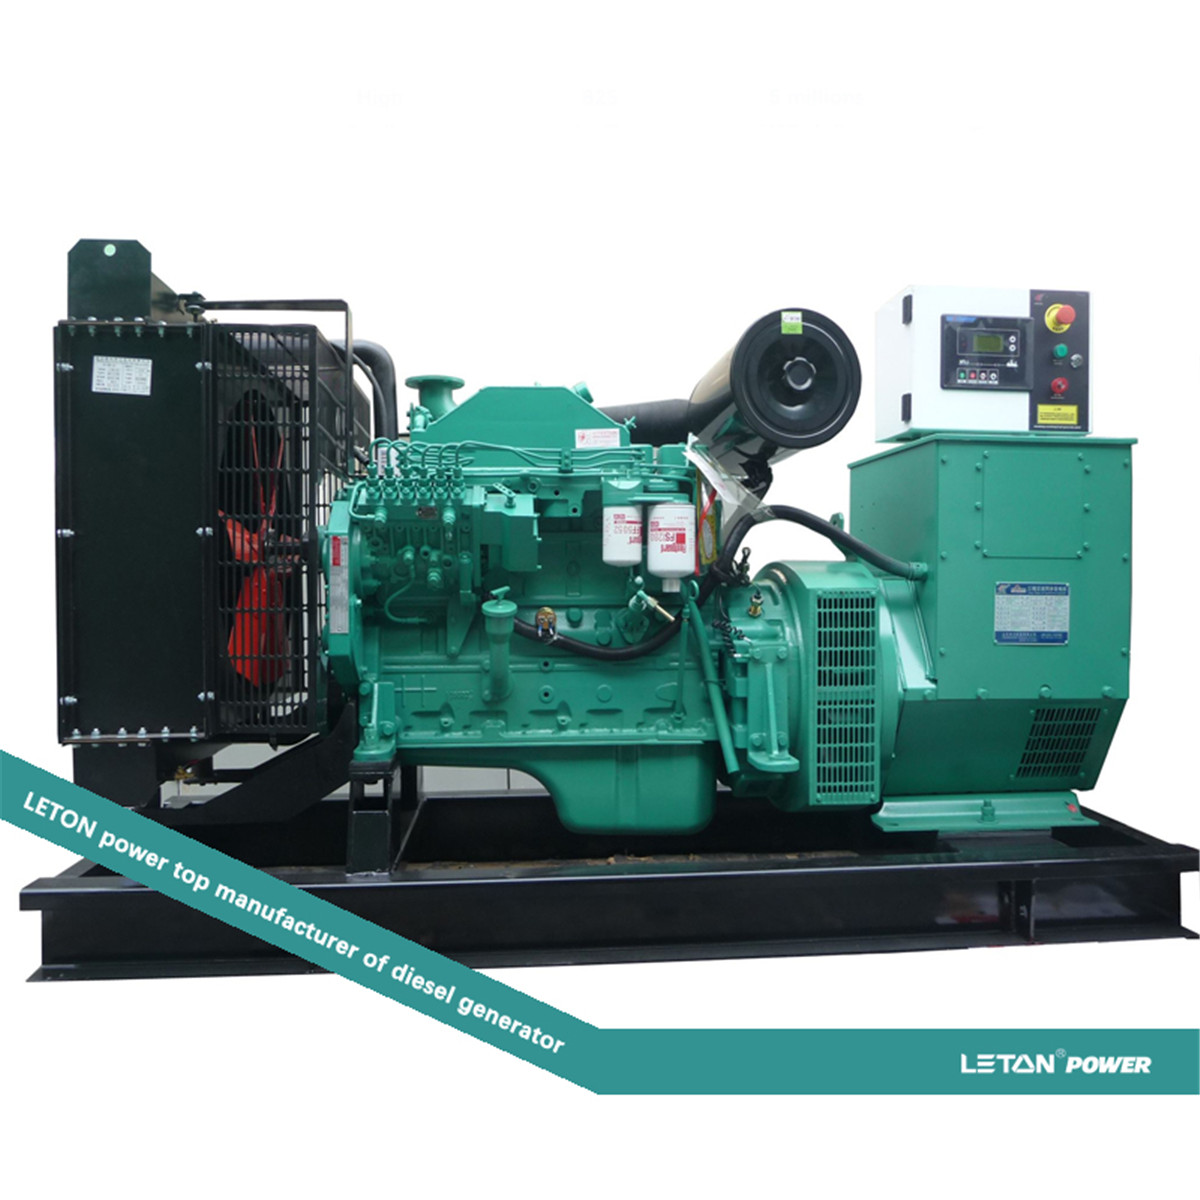 Generator Rental Market Value to Reach US$ 7.4 Bn by 2031: